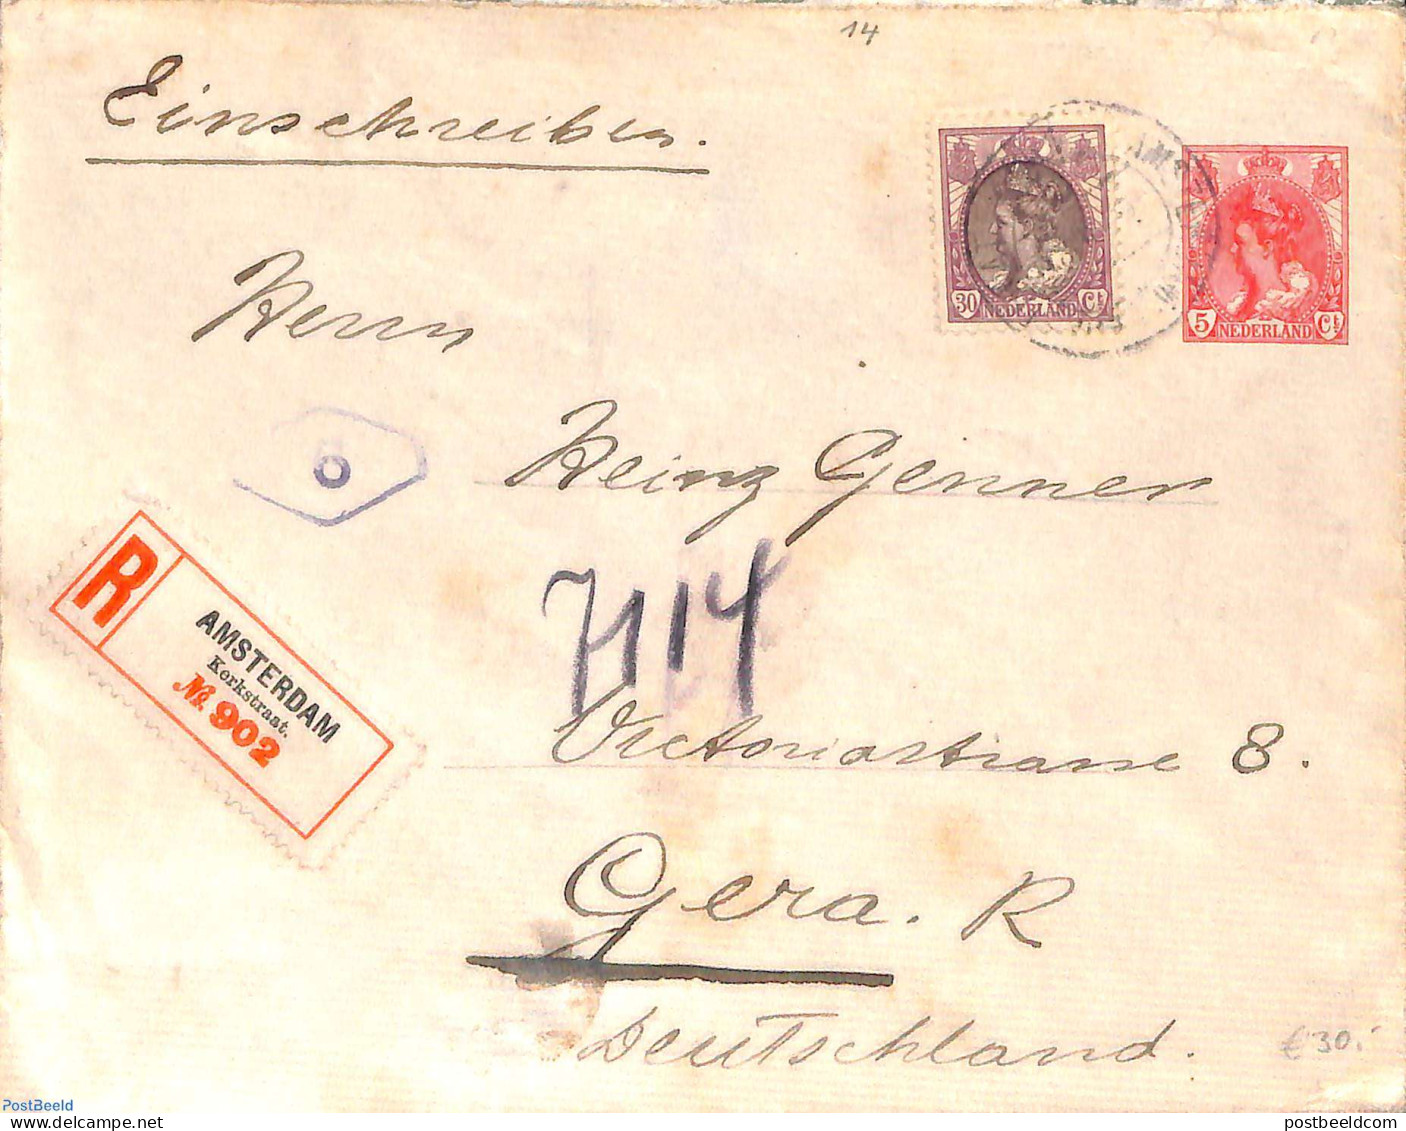 Netherlands 1919 Envelope 5c, Uprated To Registered Mail From Amsterdam To Gera (D), Used Postal Stationary - Storia Postale